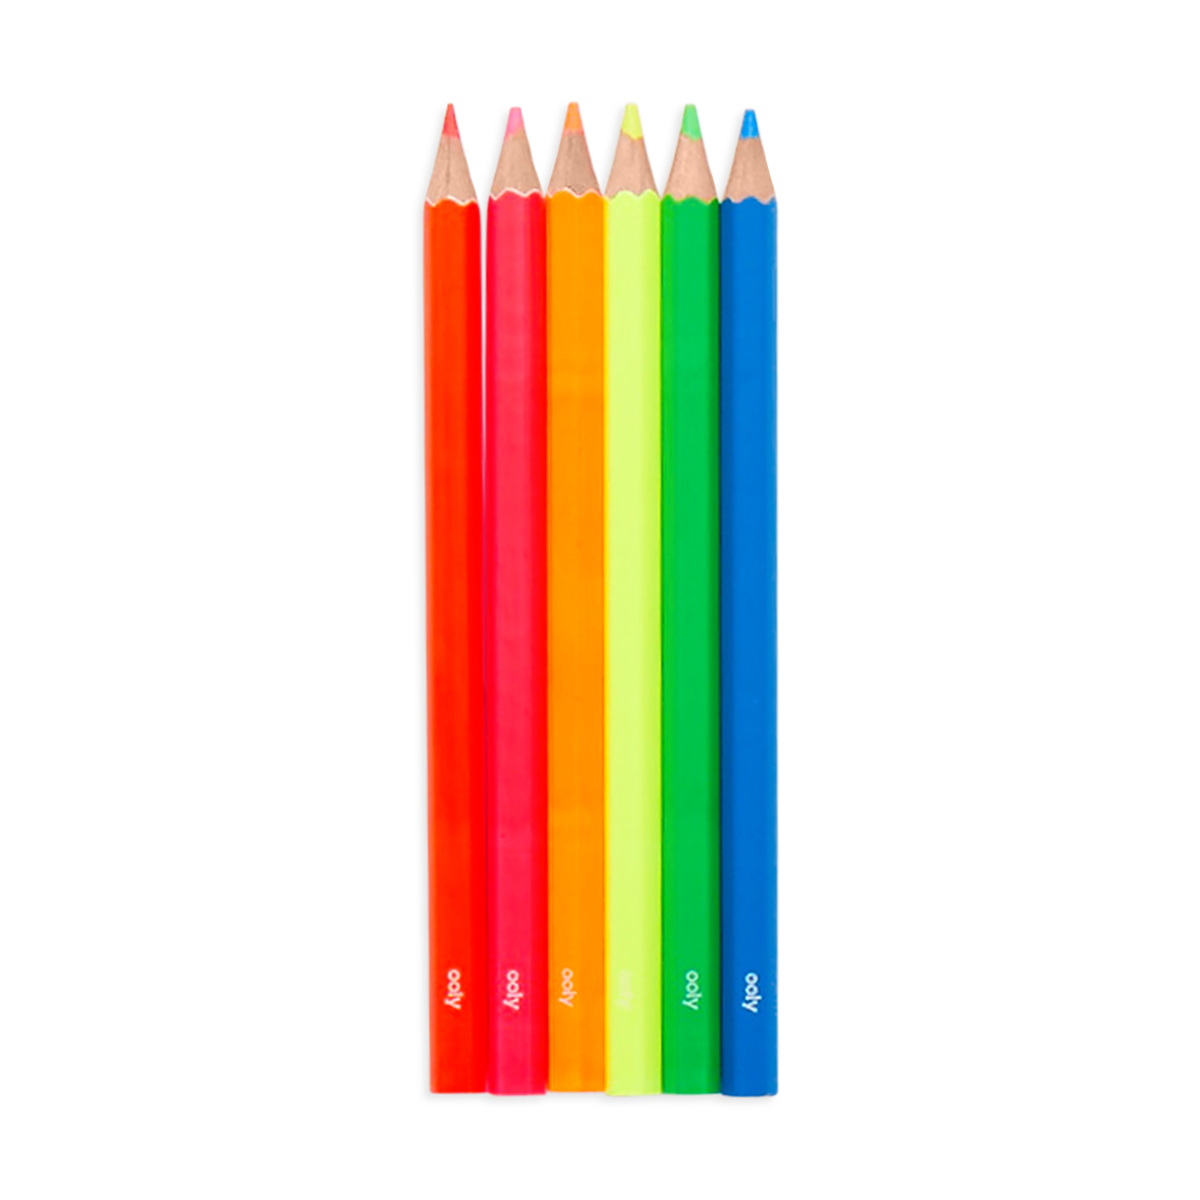 OOLY Jumbo Brights Neon Colored Pencils out of packaging